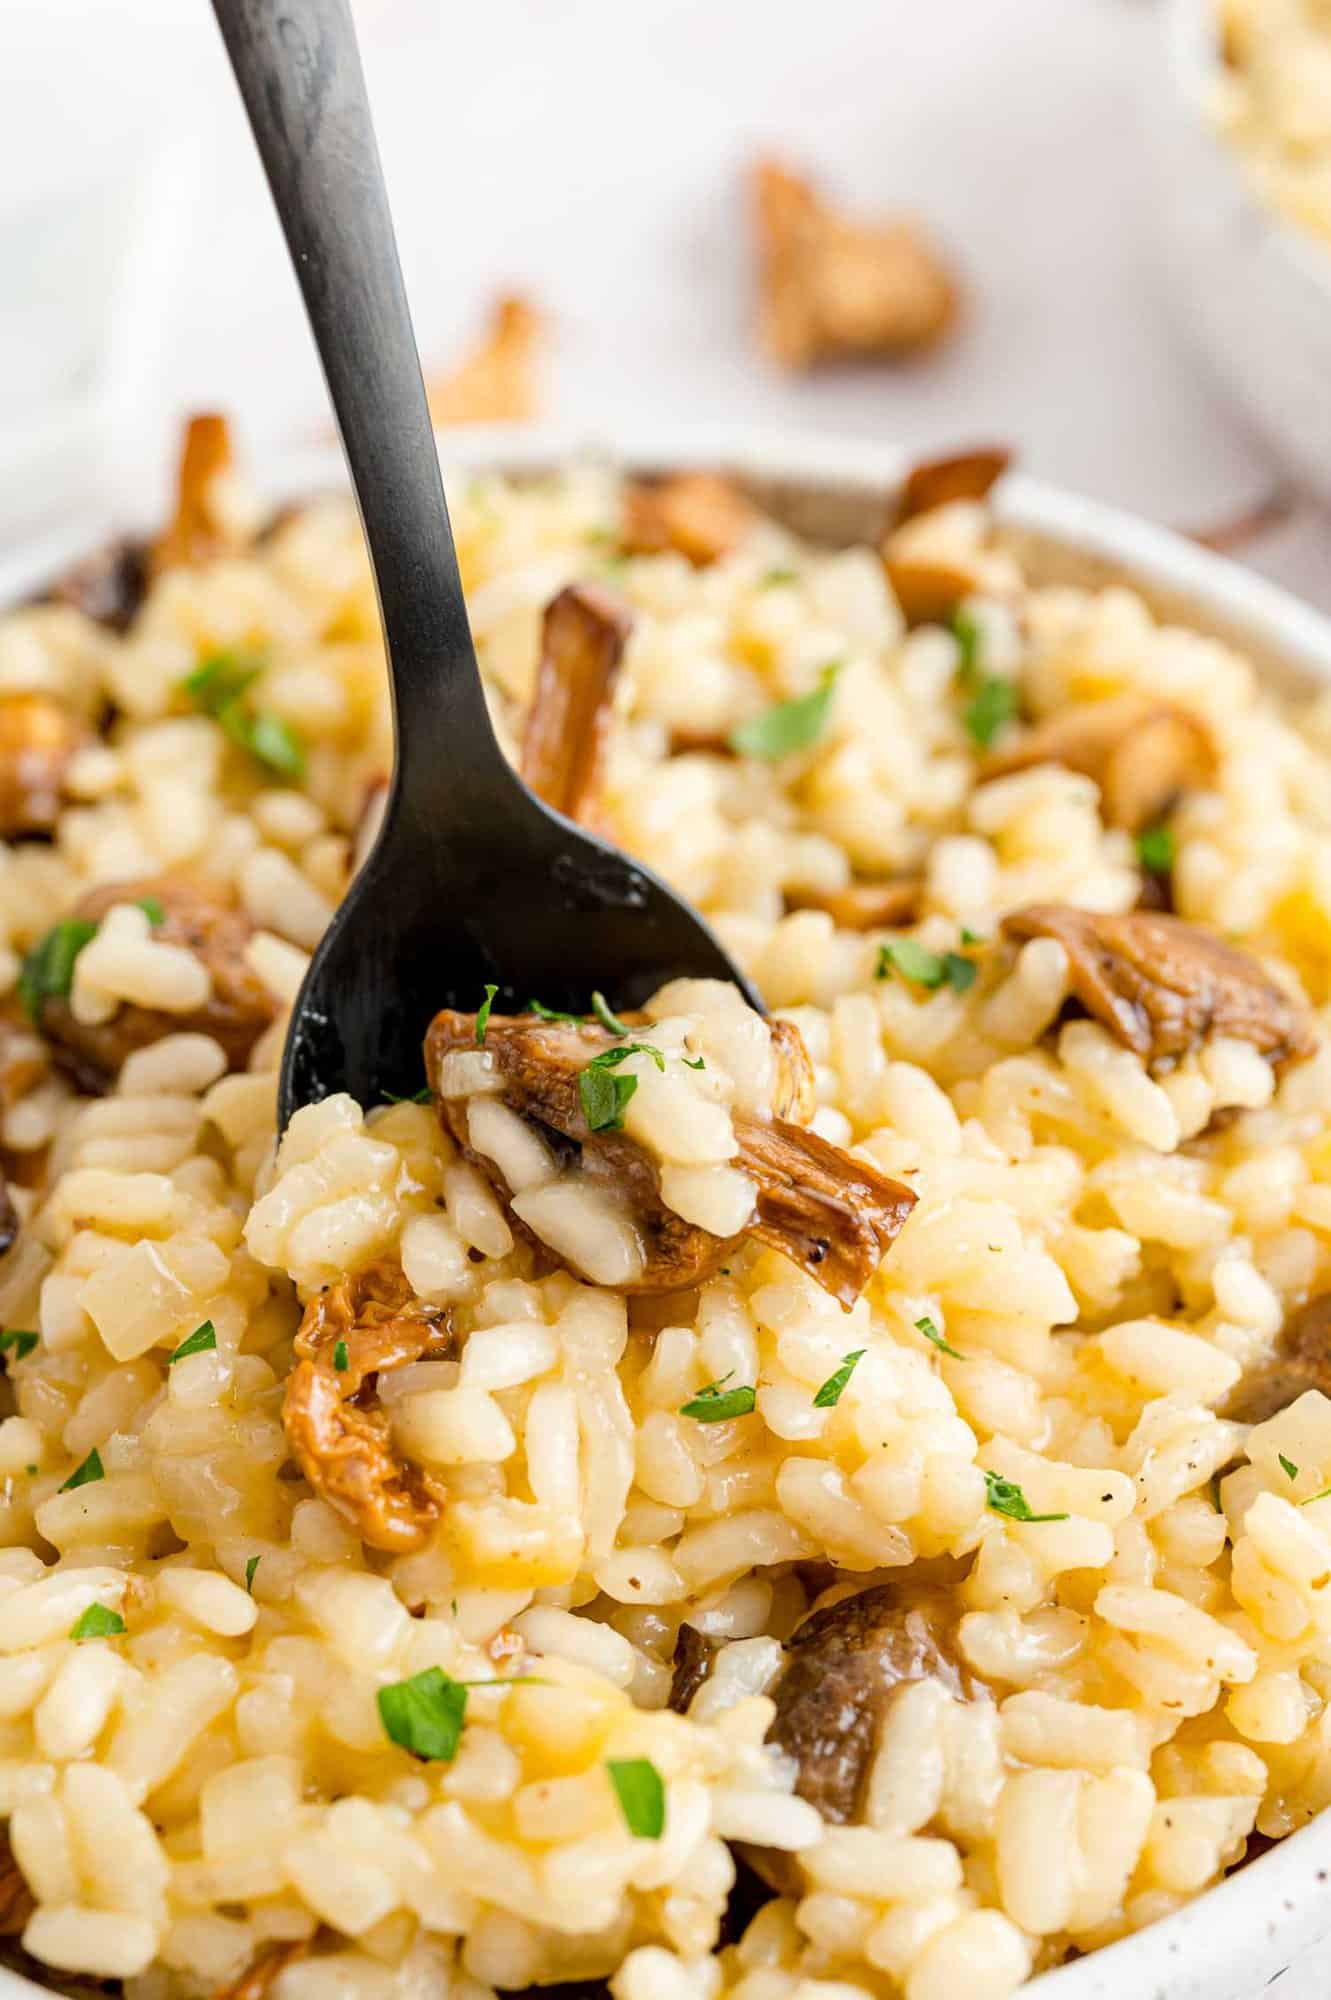 A spoon stuck into a bowl of mushroom risotto.